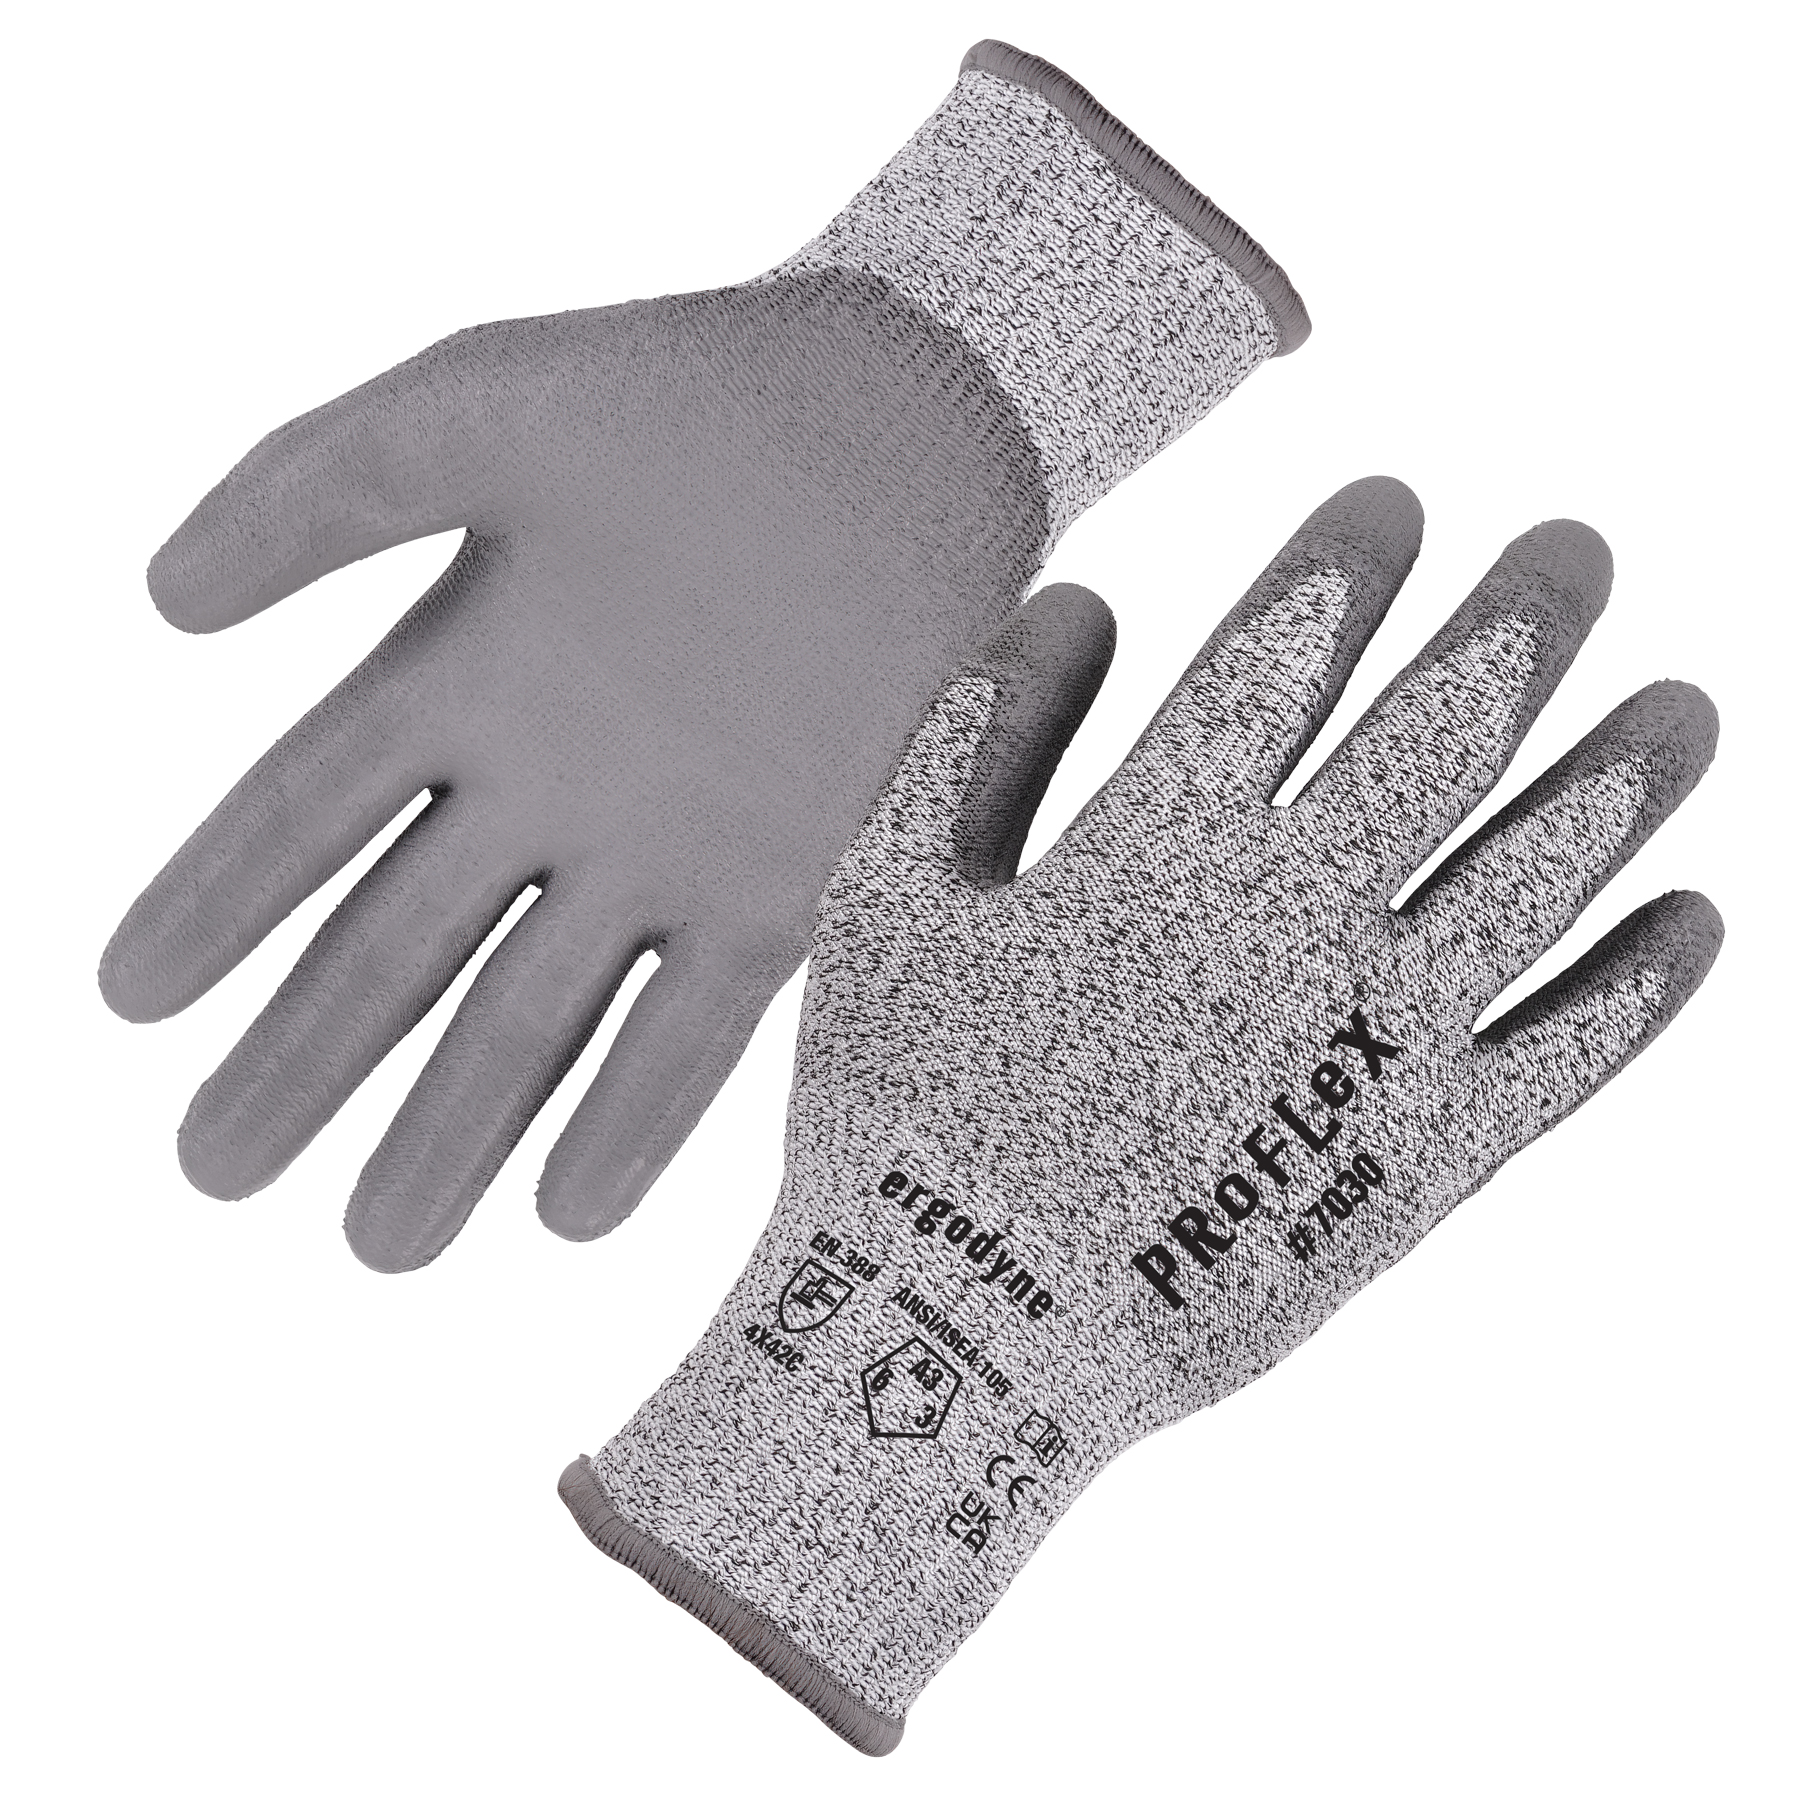 PURE BLACK NYLON PU COATED SAFETY WORKING GLOVES **CHOOSE SIZE & QTY** 